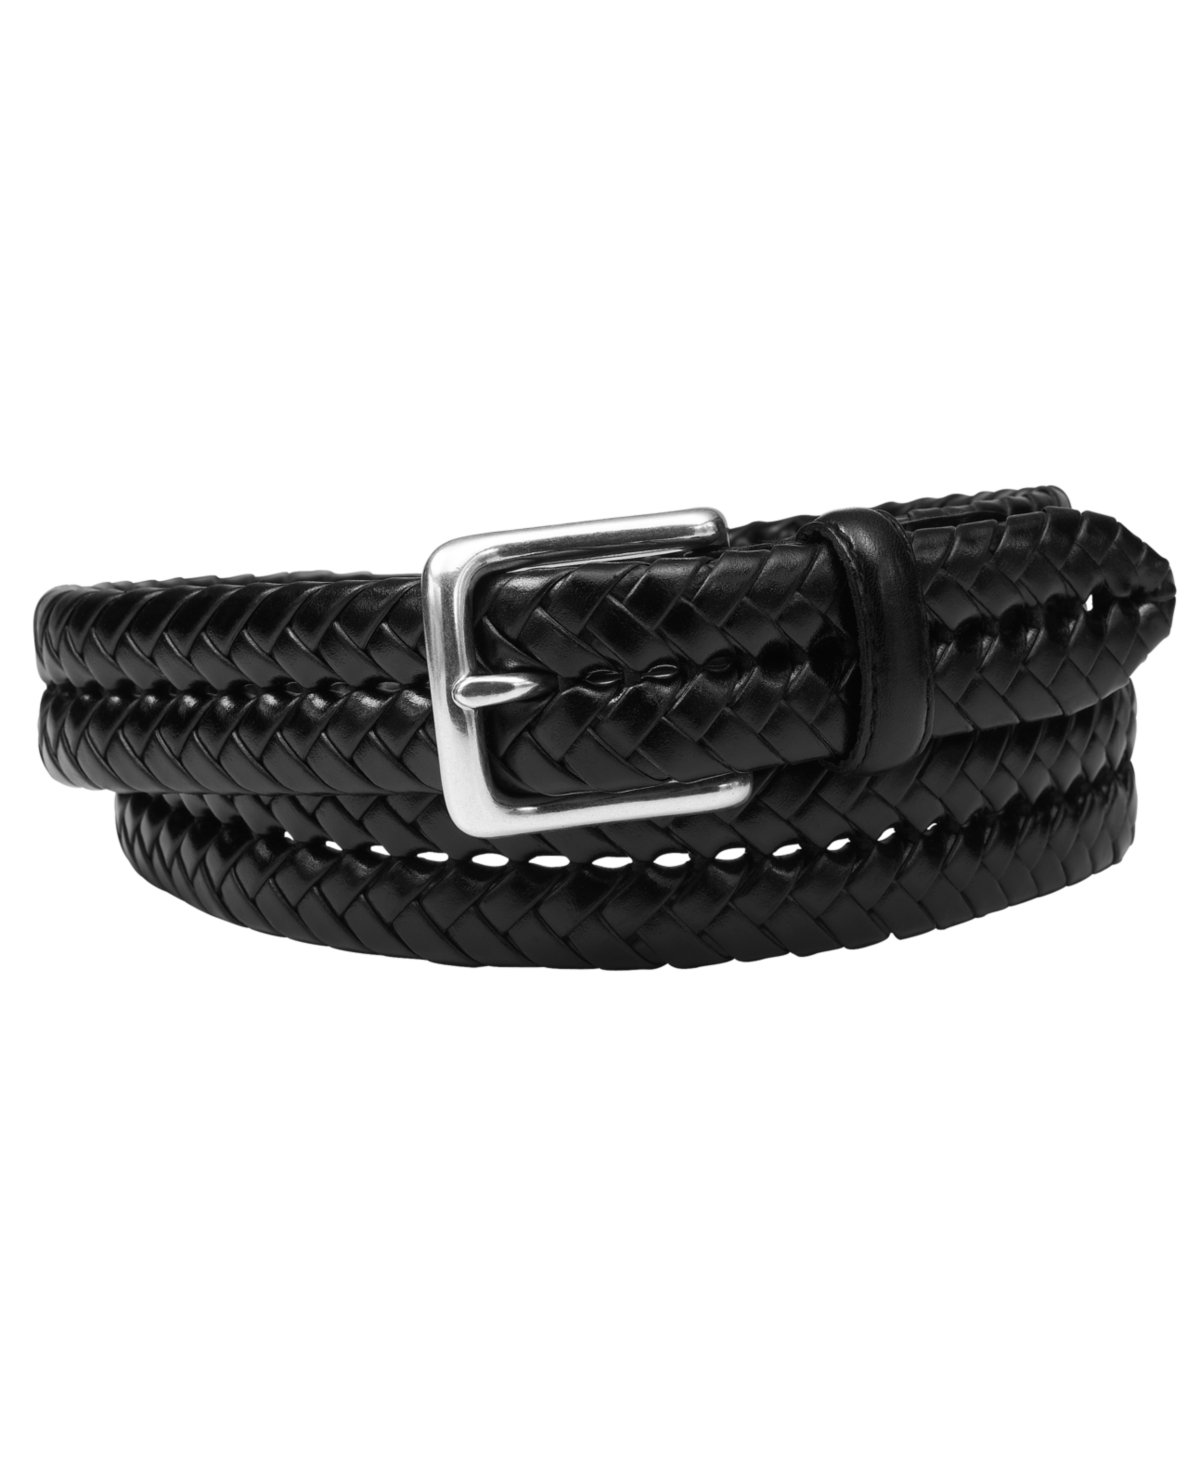 UPC 762346083474 product image for Fossil Maddox Braided Leather Belt | upcitemdb.com